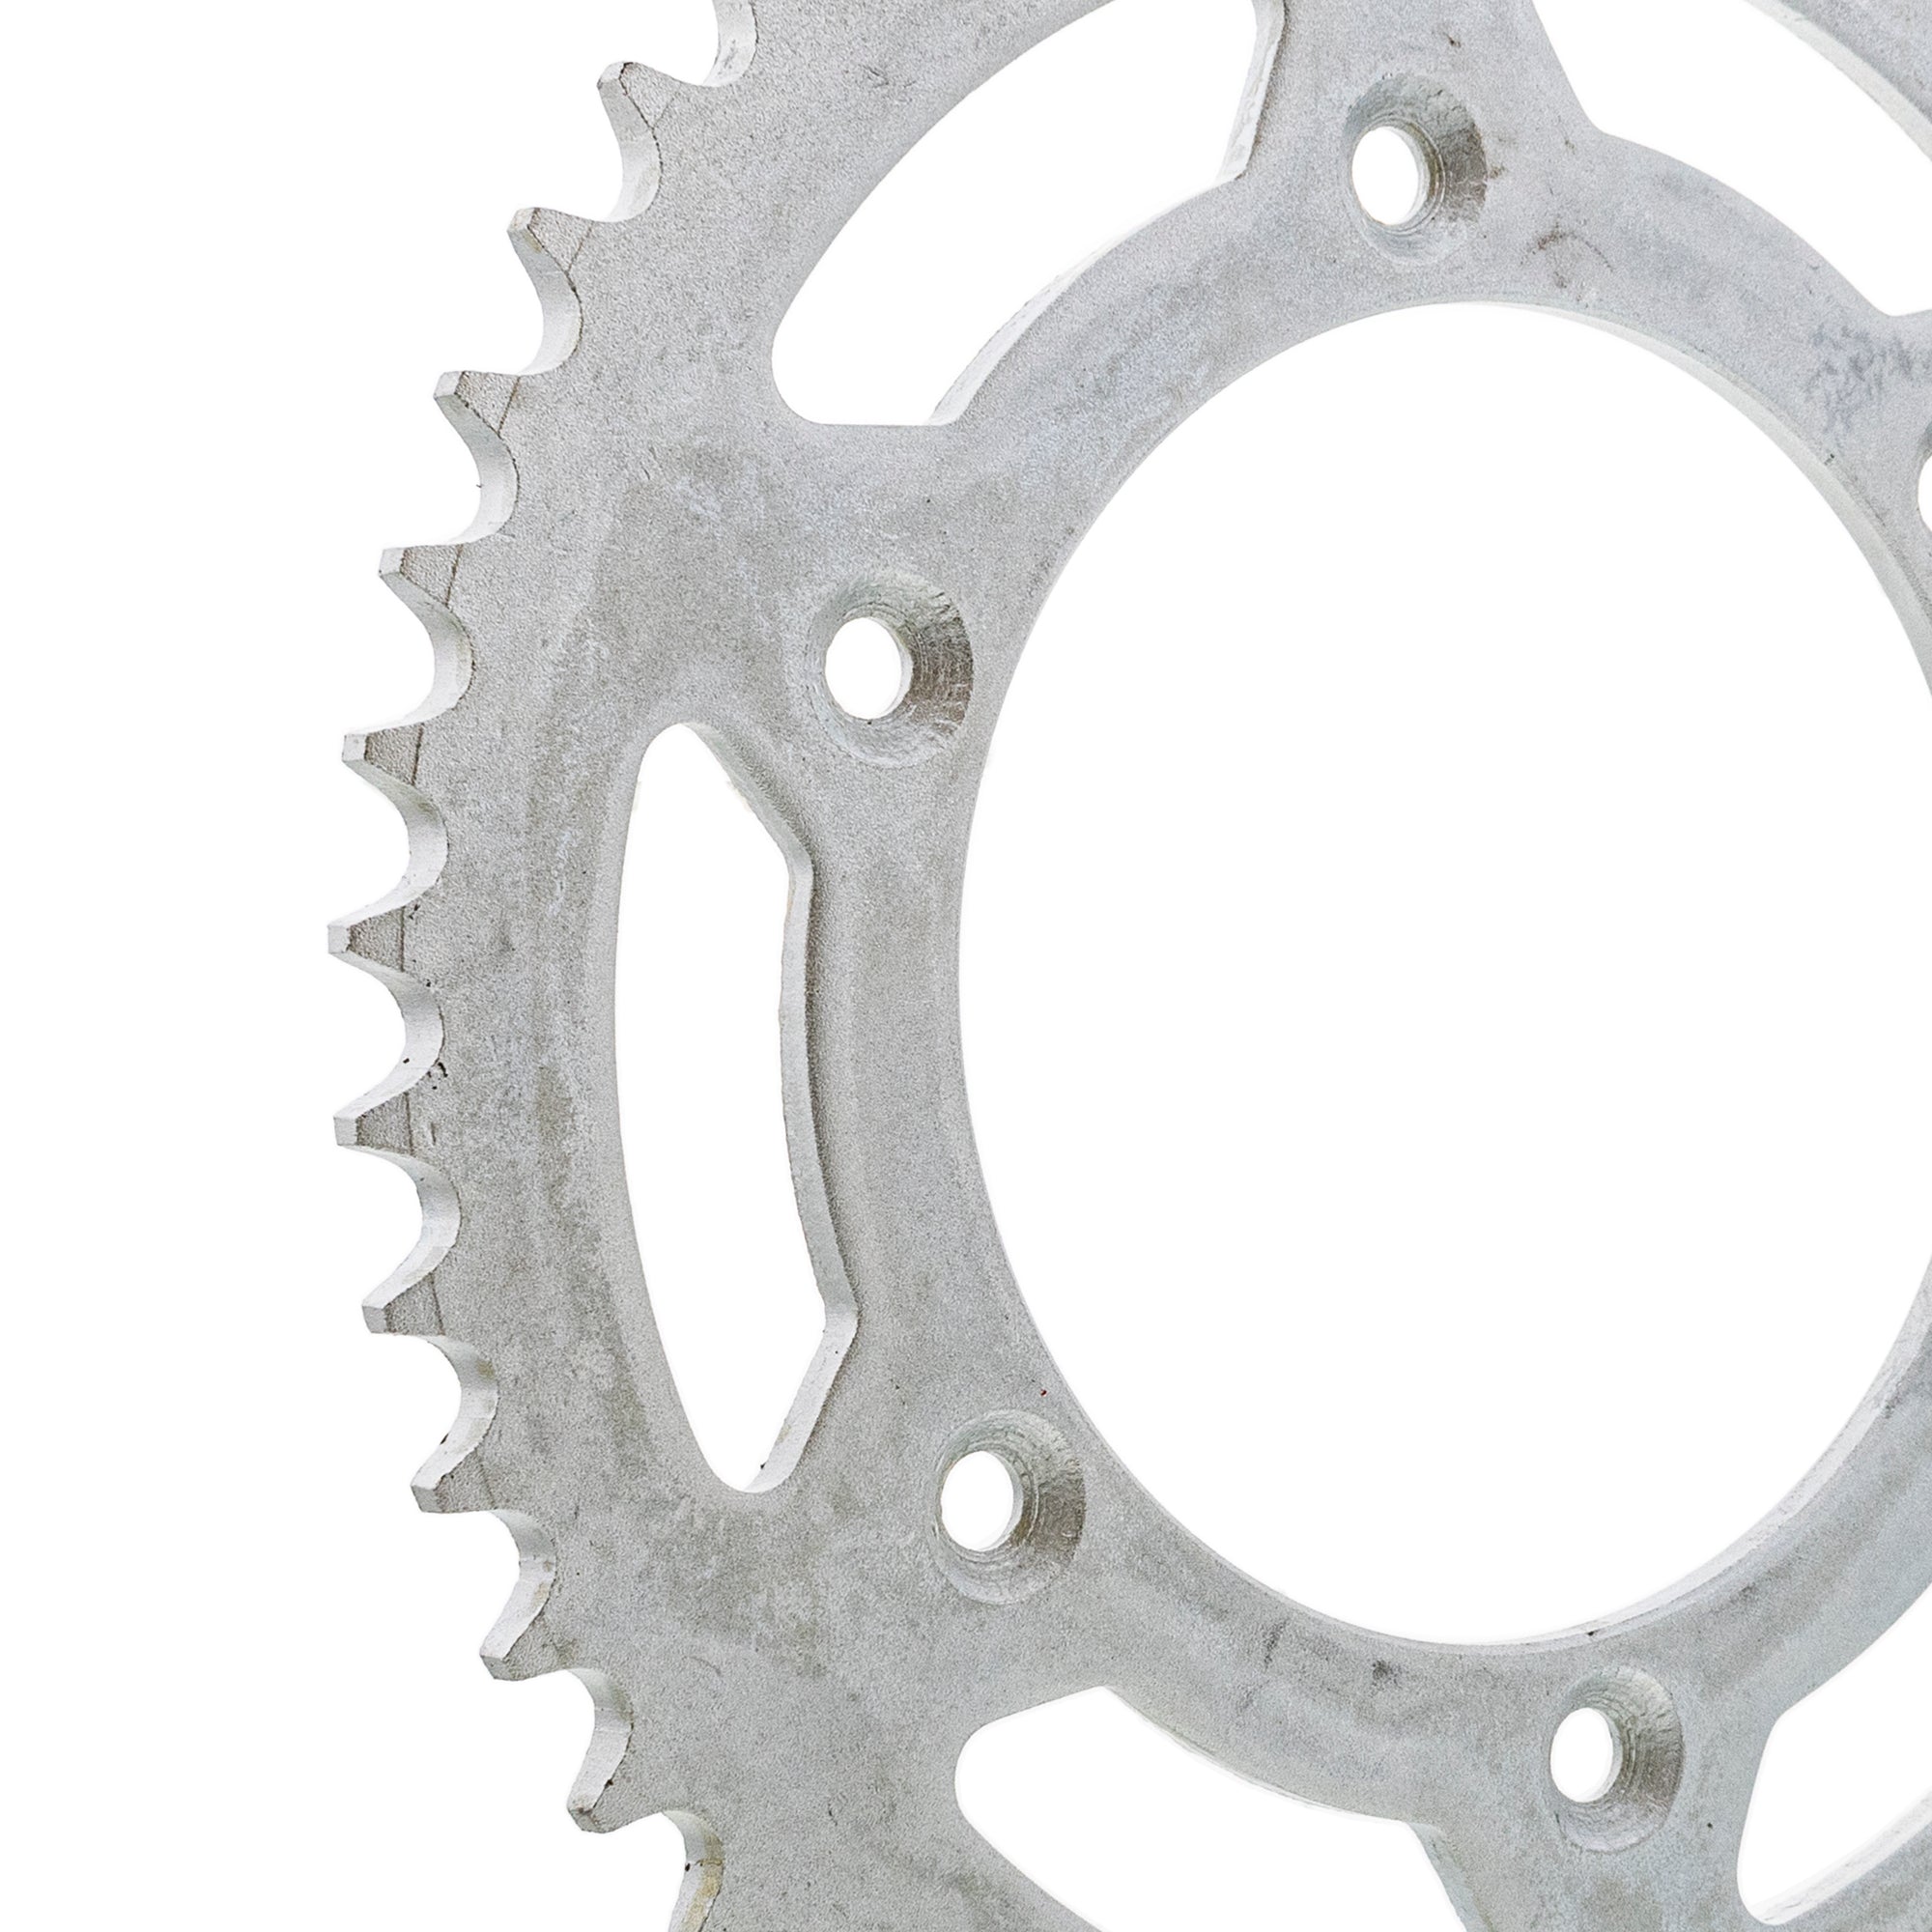 520 Pitch Front 14T Rear 48T Drive Sprocket Kit for KTM 250 200 525